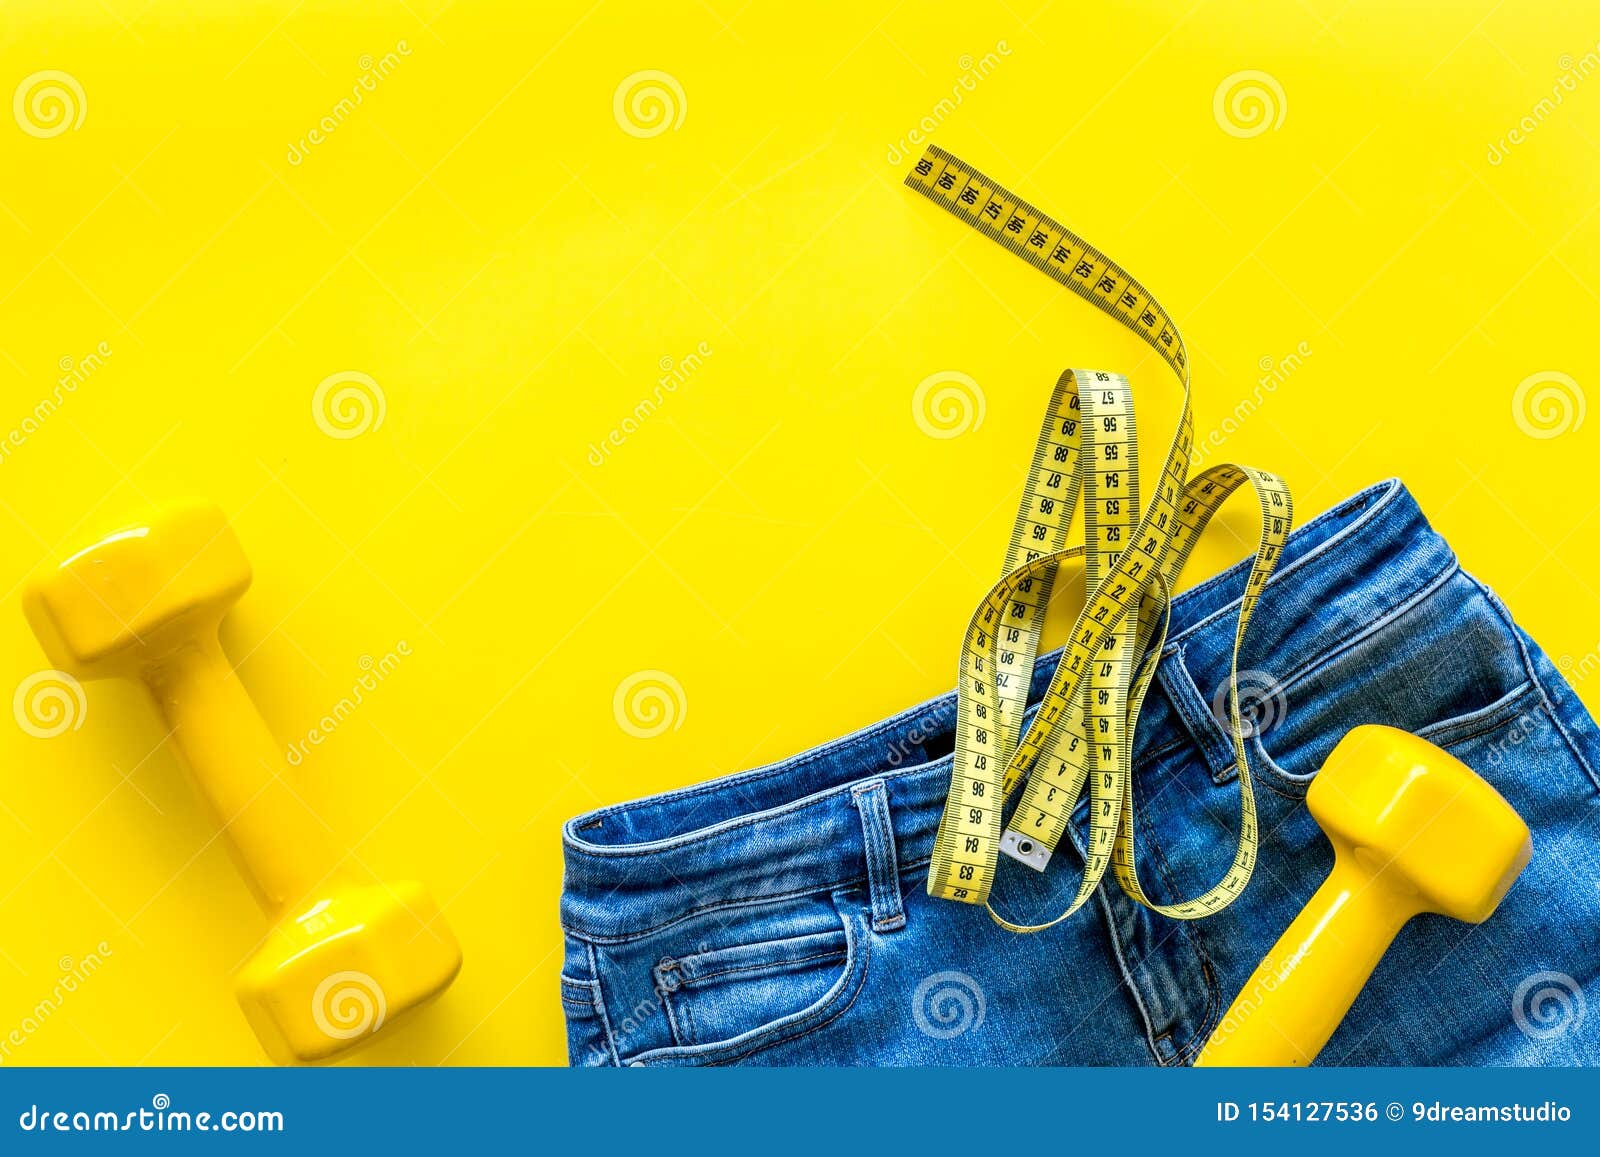 Download Weight Loss Concept With Jeans, Bars And Measuring Tape On ...